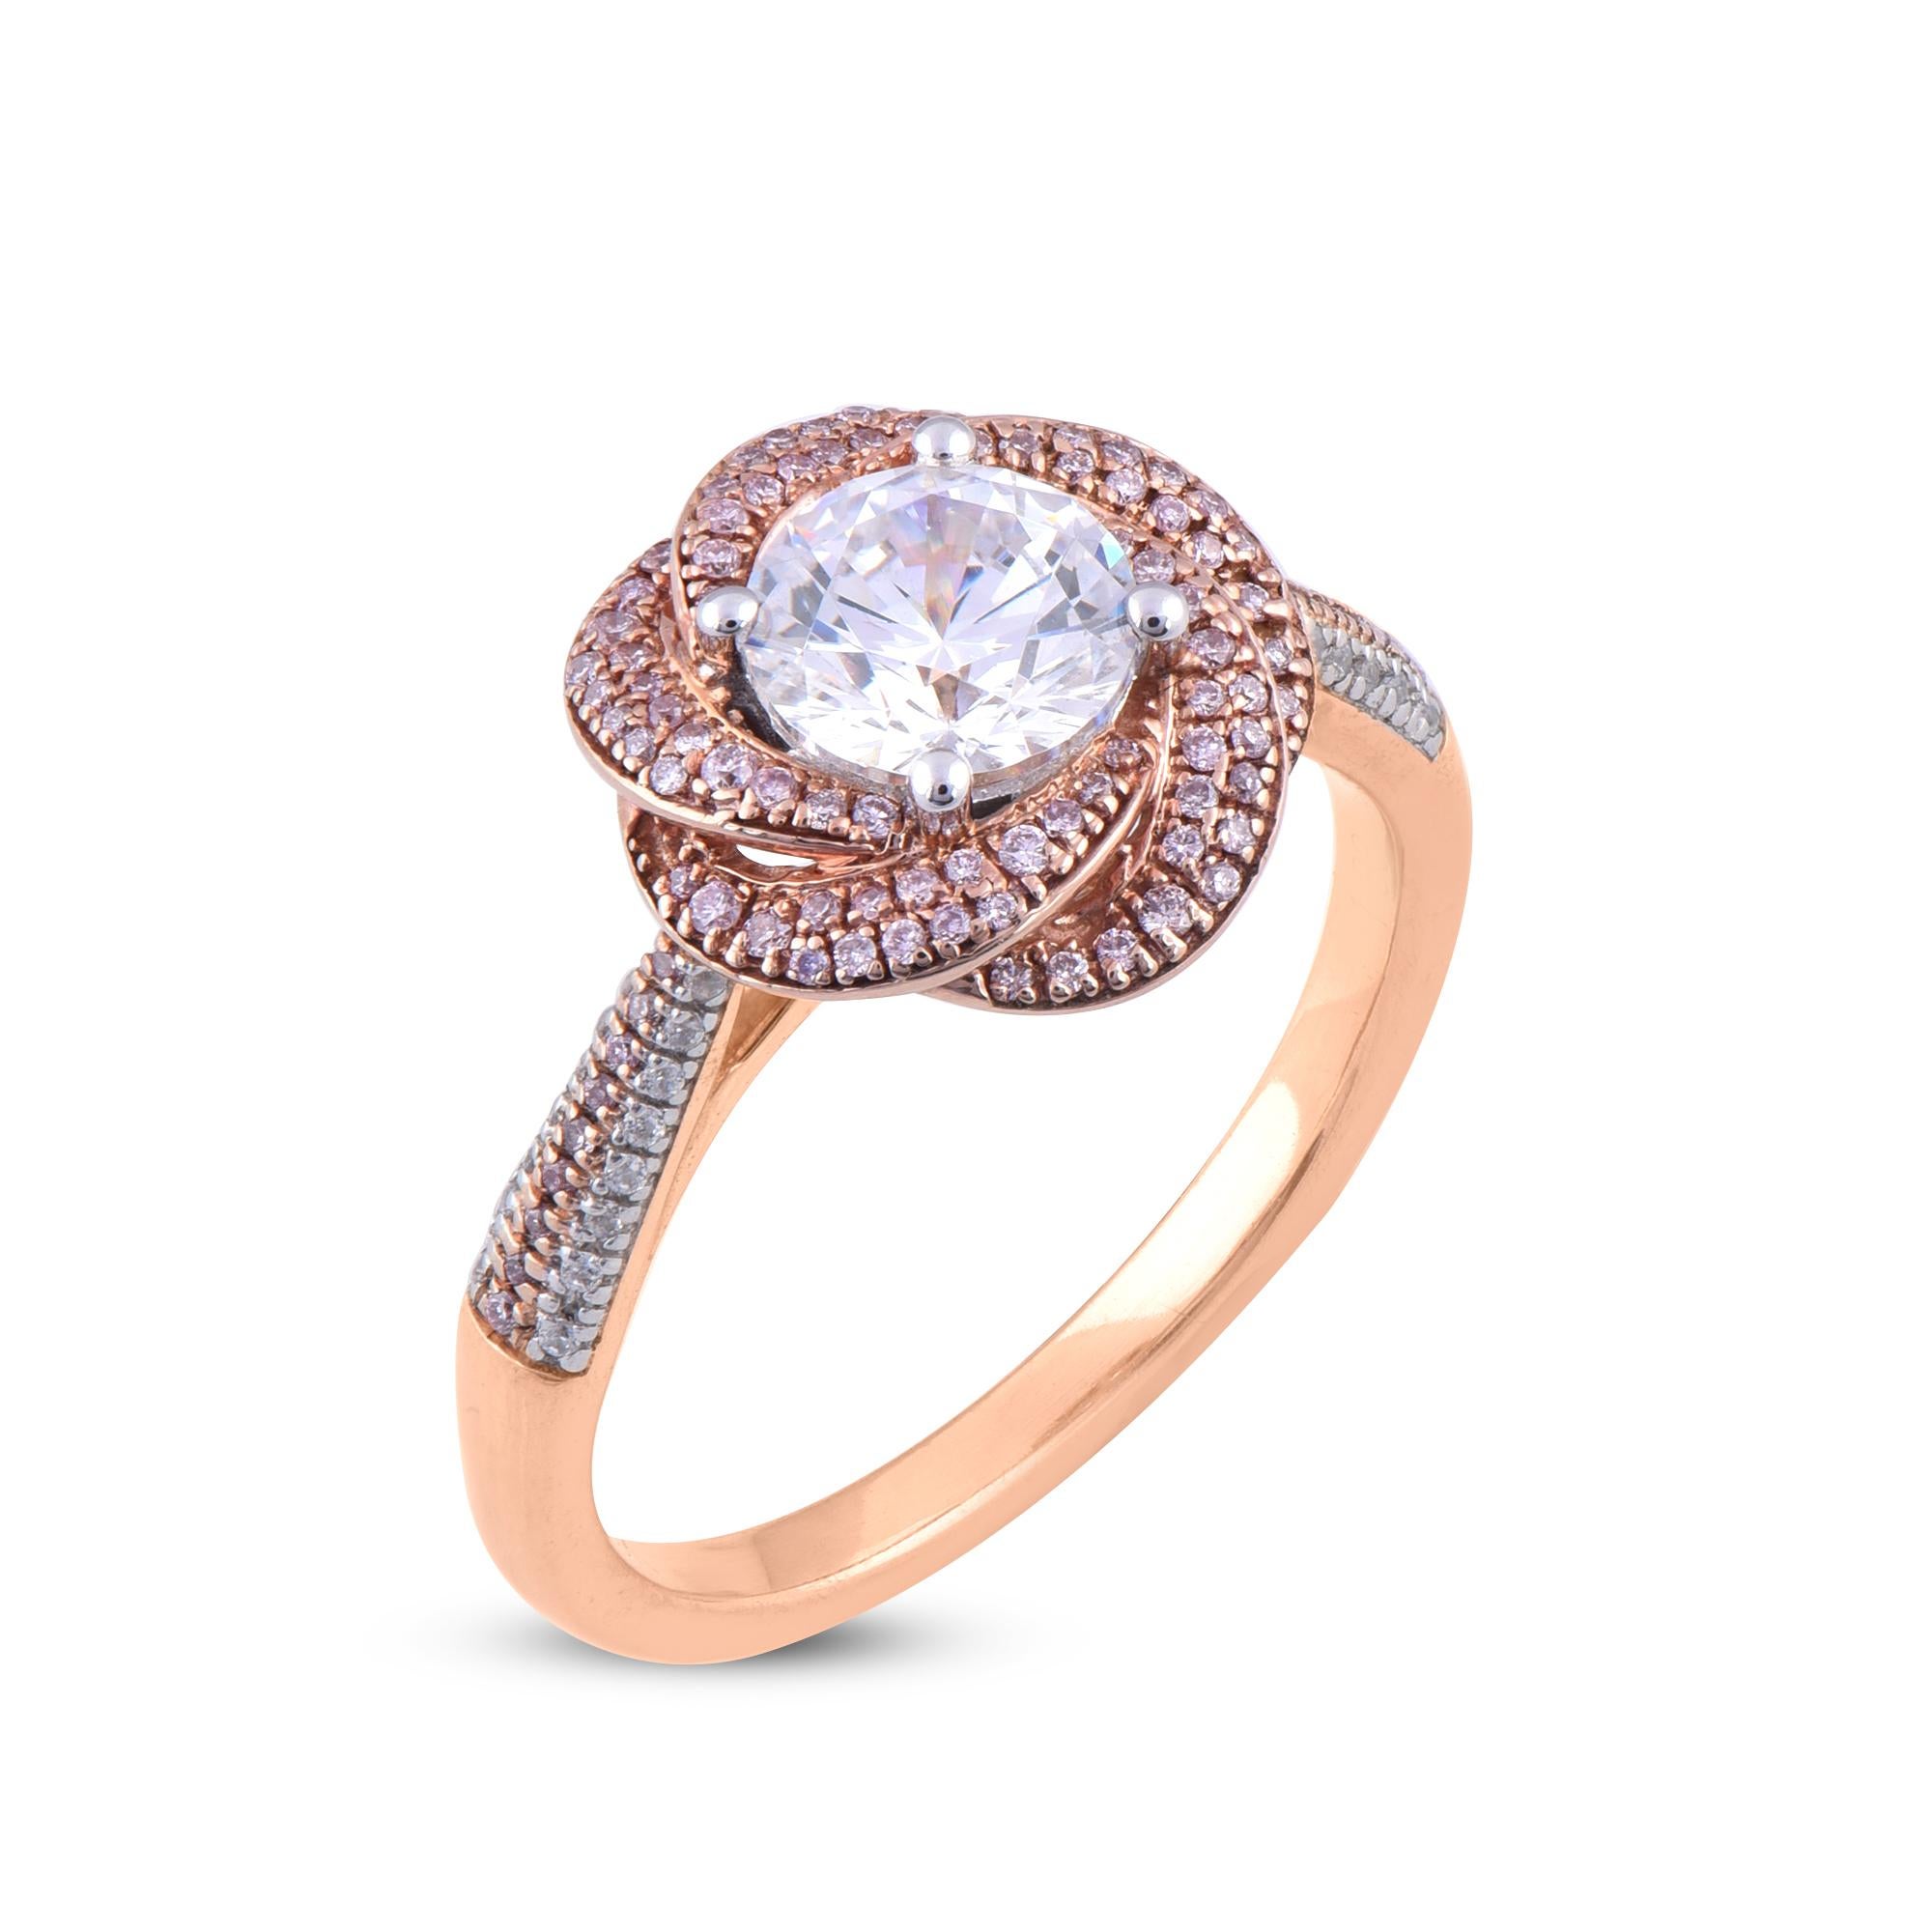 Hand crafted by our inhouse experts in 18 kt yellow gold the engagement ring has 1.00 ct centre stone and 0.33 ct of pink and white diamond studded beautifully around the centre stone and on the shank in micro pave setting. Dazzles in G-H color SI1